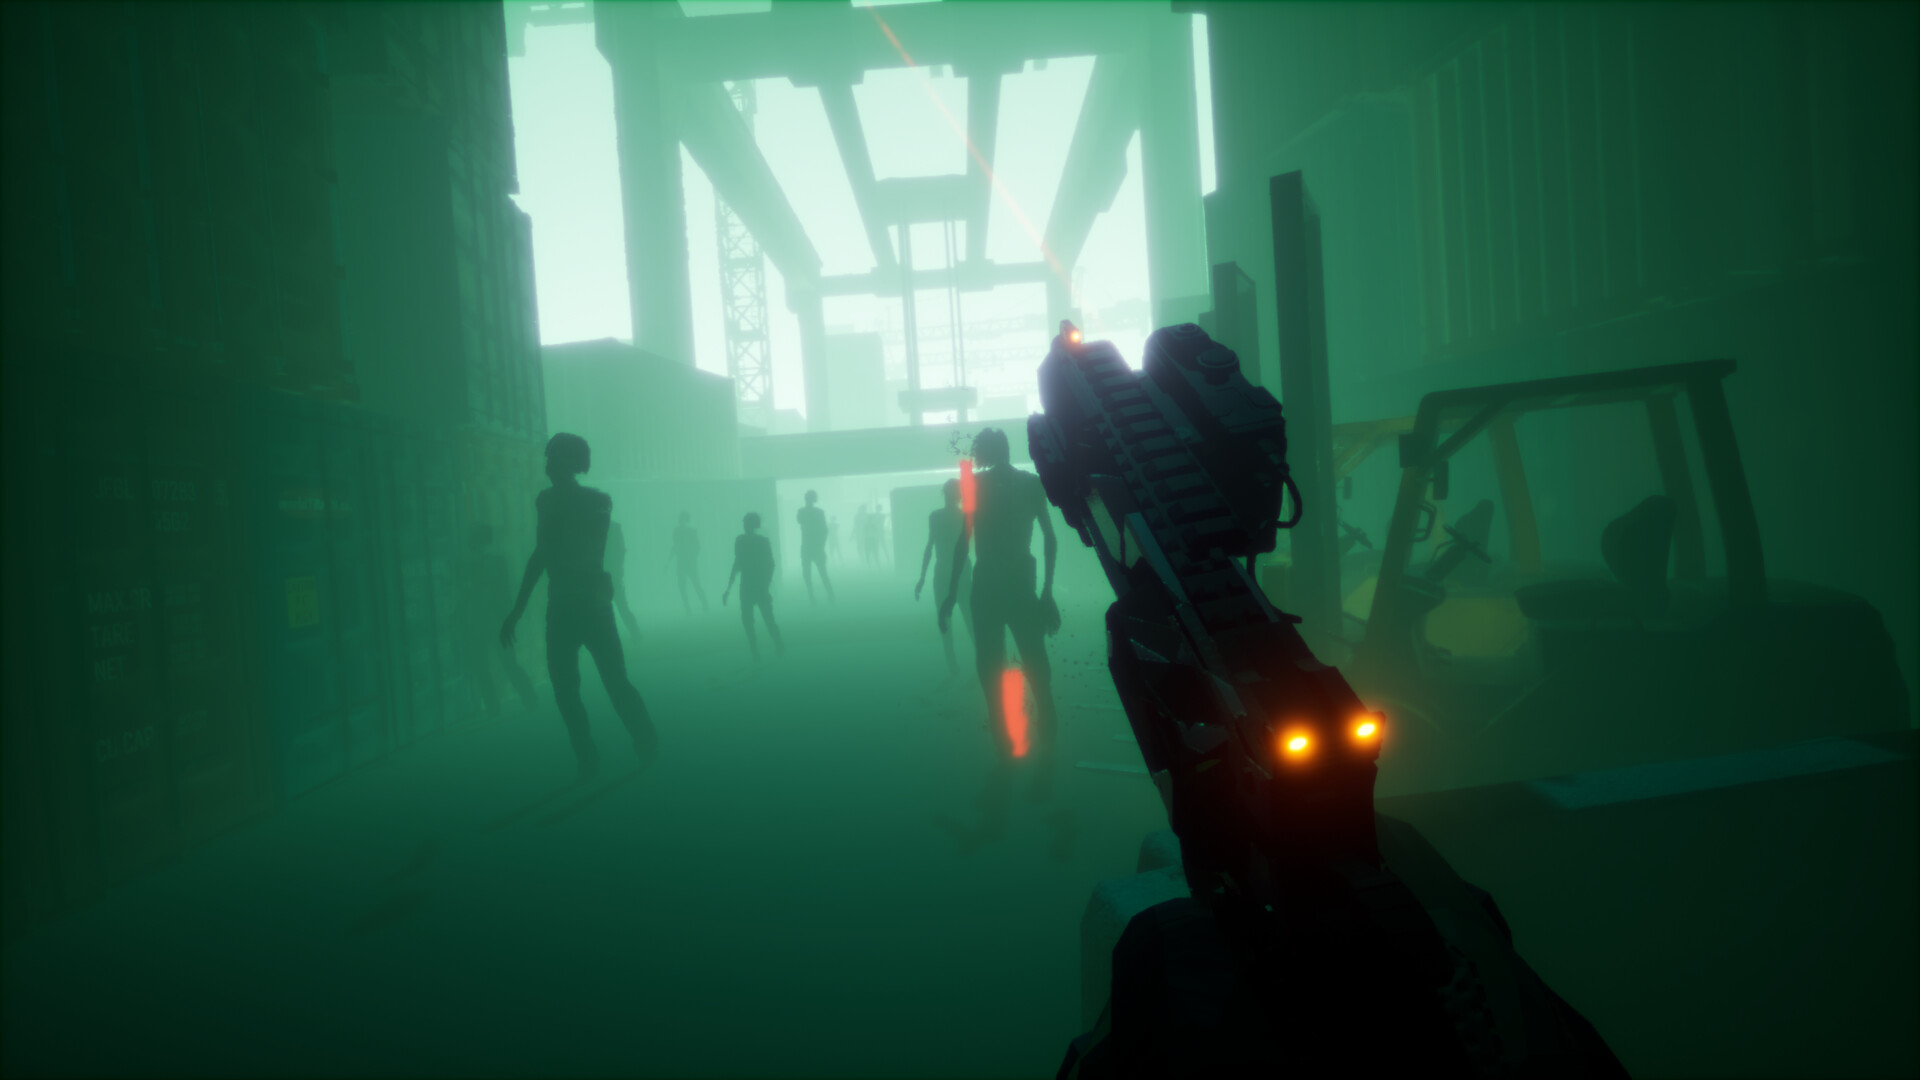 Prion: Infection Steam CD Key